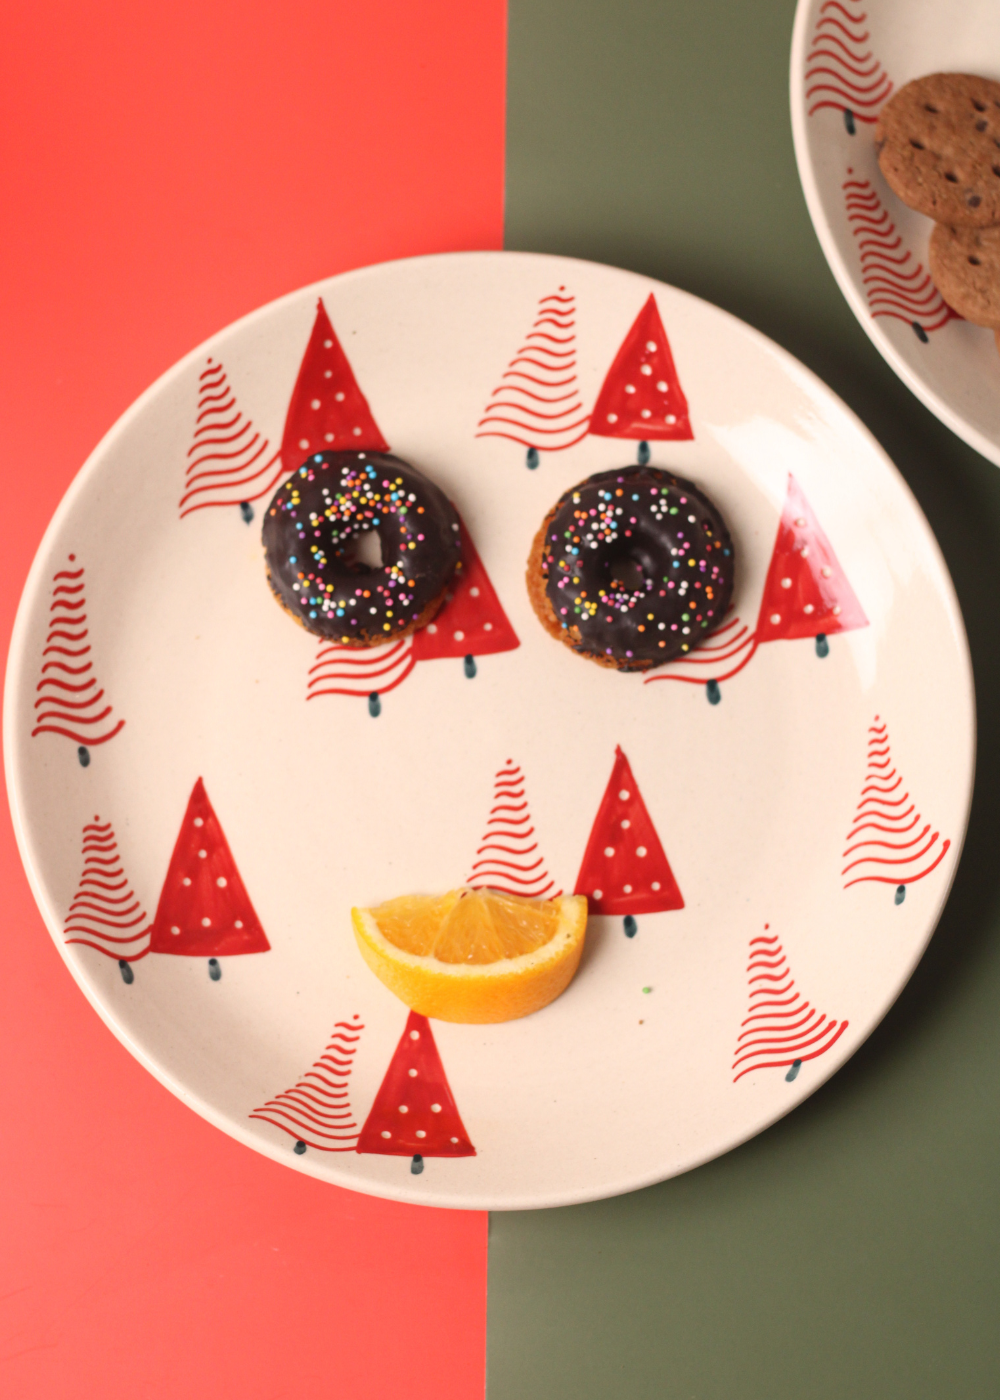 Red Christmas Tree Dinner Plate With Donuts 